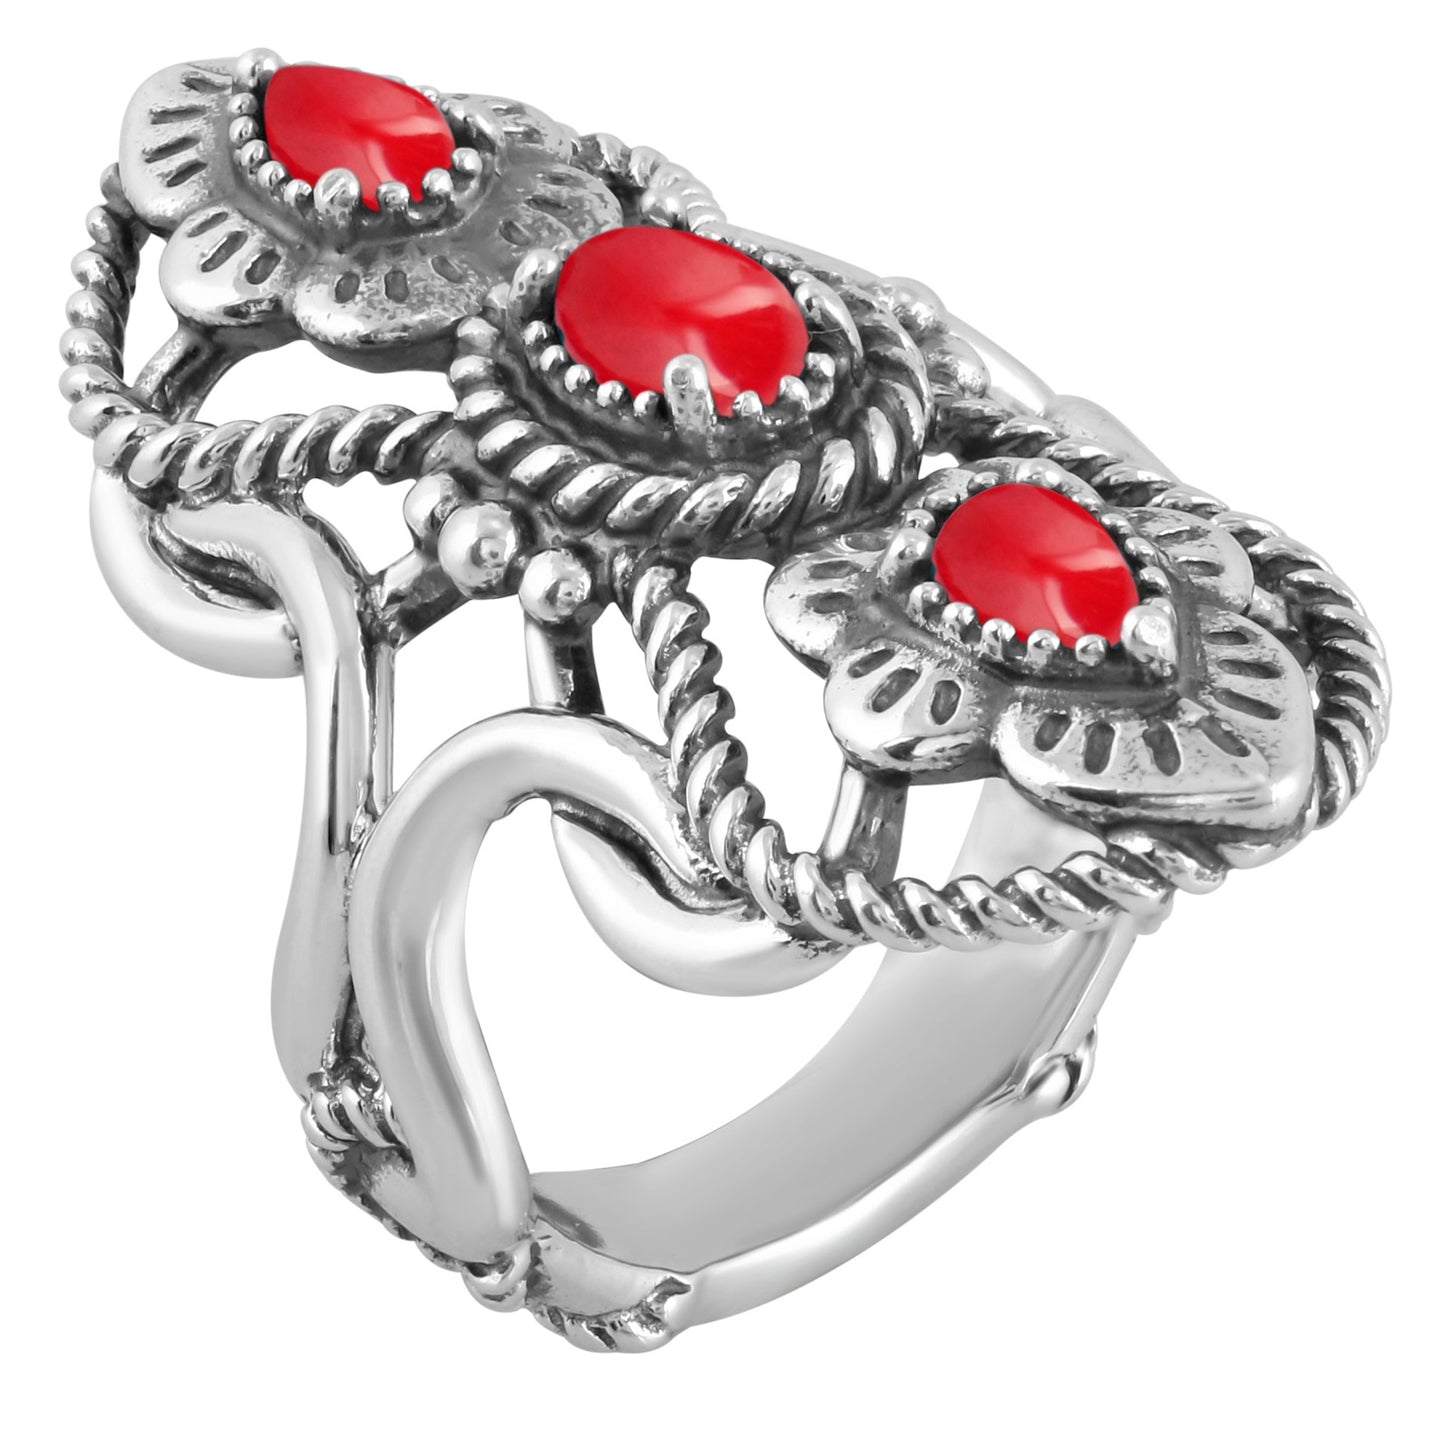 American West Jewelry Genuine Red Coral Sterling Silver Elongated Ring Size 5-10